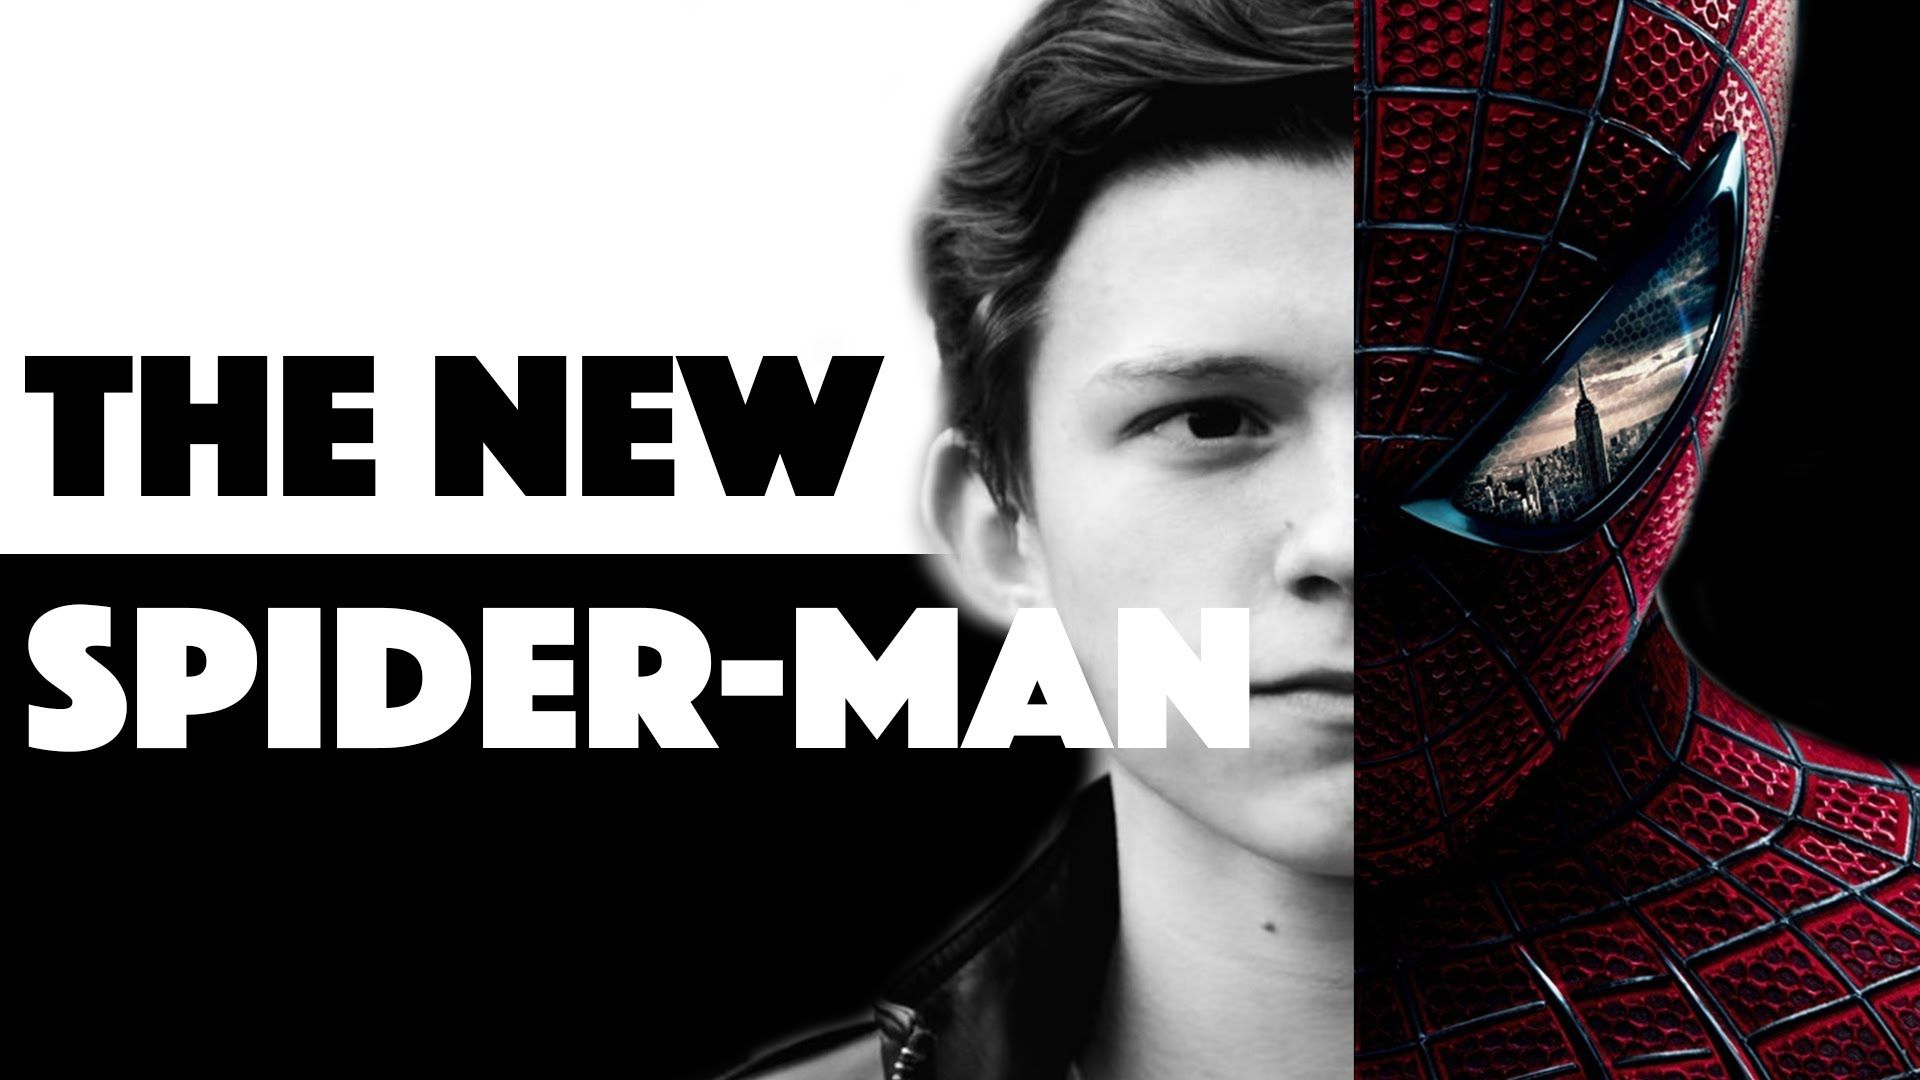 Tom Holland HD Wallpaper Free Download in High Quality and Resolution